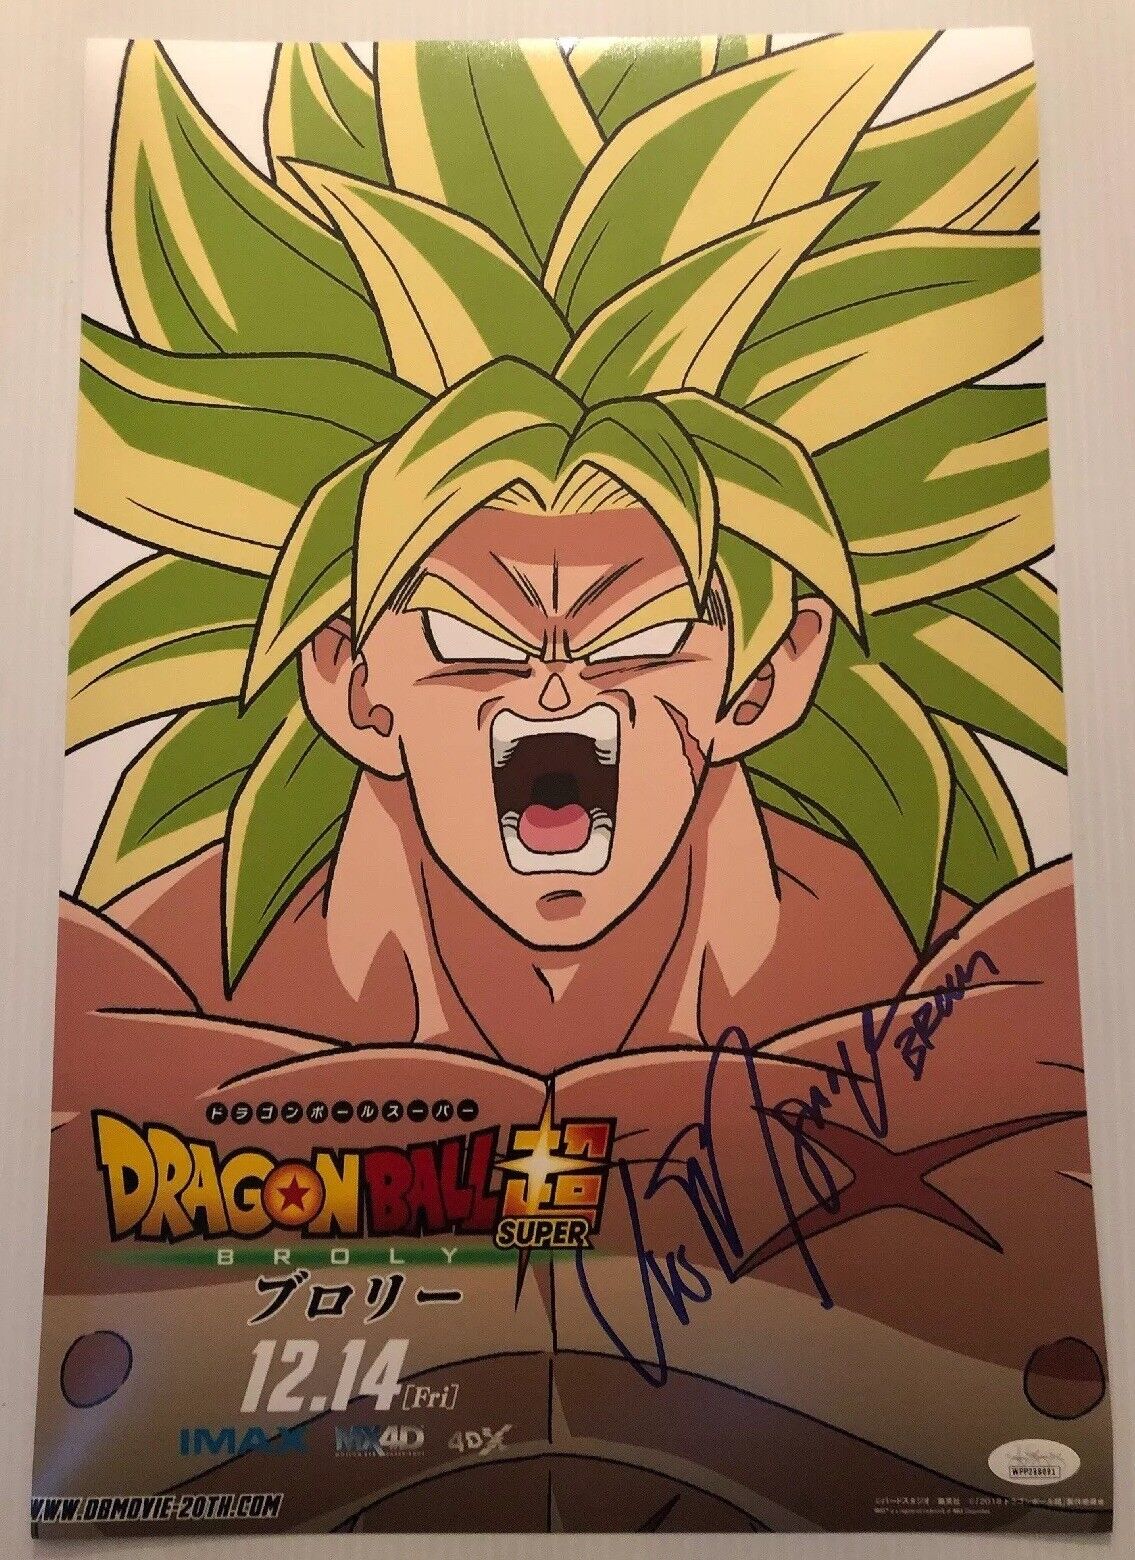 Vic Mignogna Signed Autographed 12x18 Photo Poster painting Dragon Ball Z Super Broly JSA COA